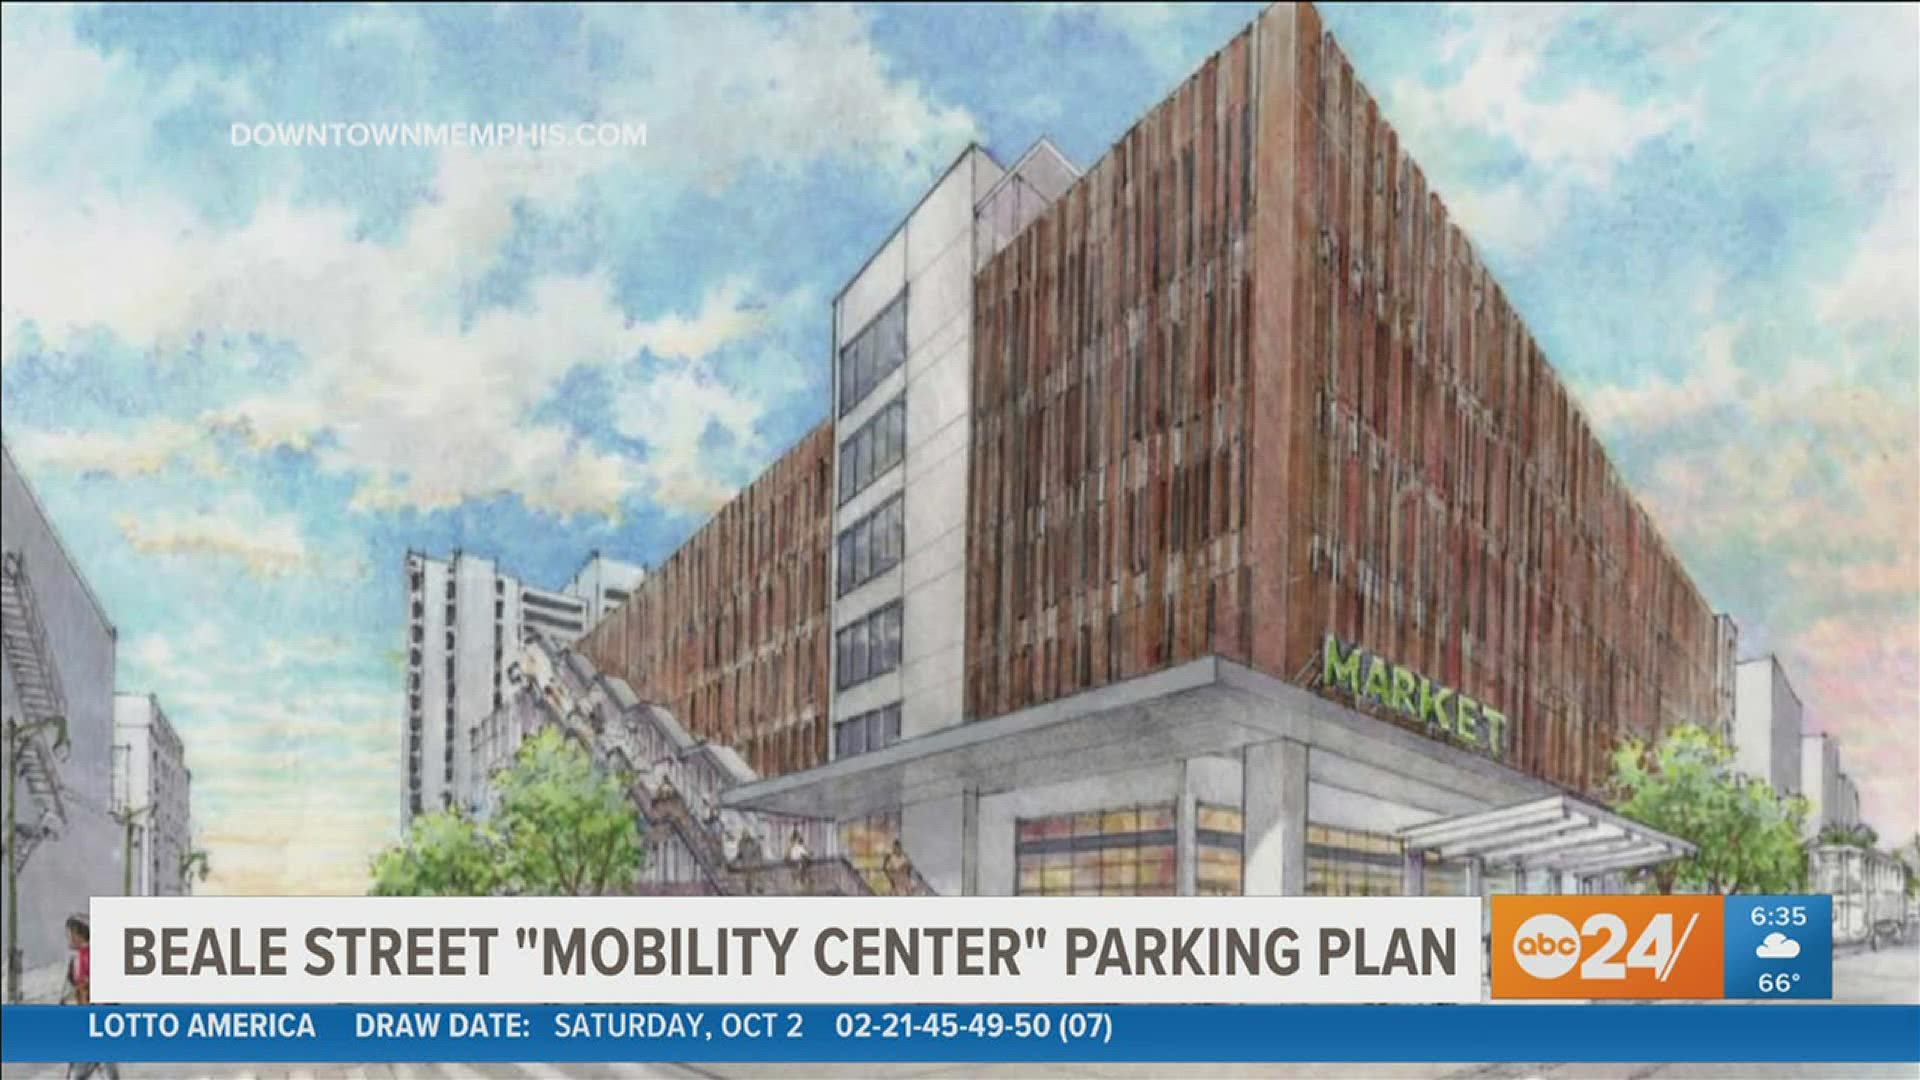 A six-story parking garage and mixed-used building is planned for a parking lot near Beale Street